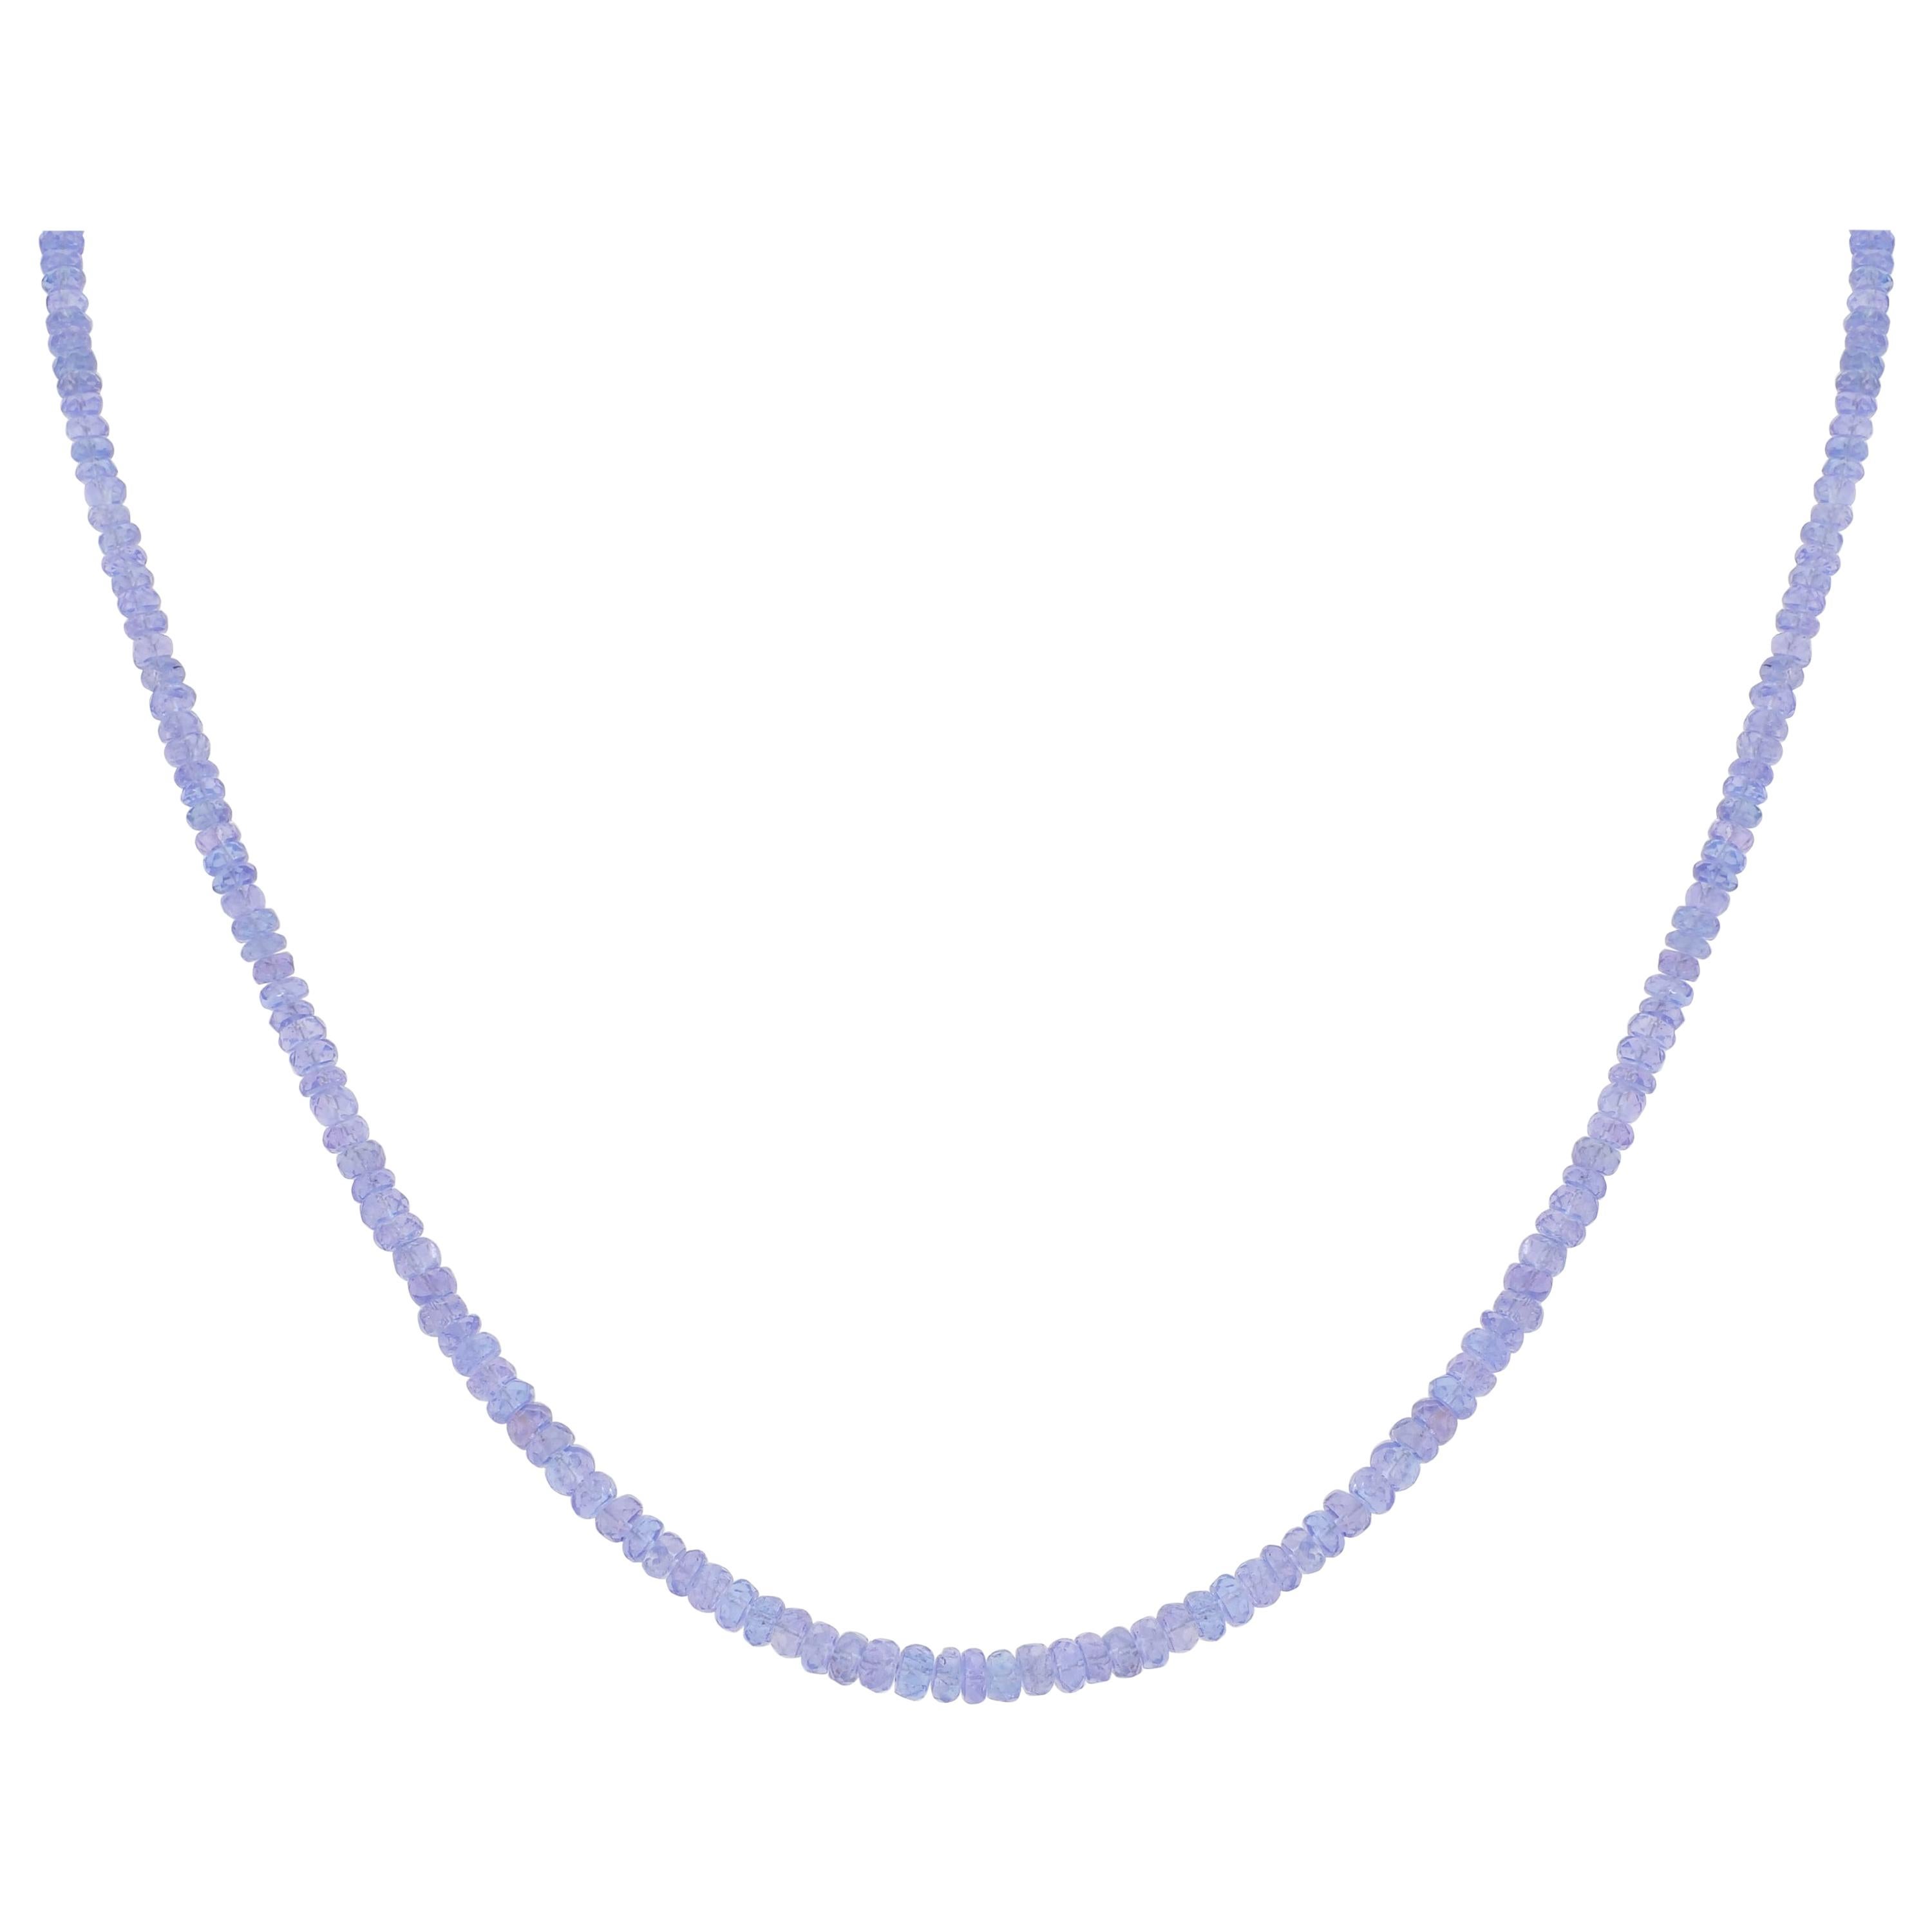 Gemistry 56.57 Carat Tanzanite Beads Necklace in 925 Sterling Silver